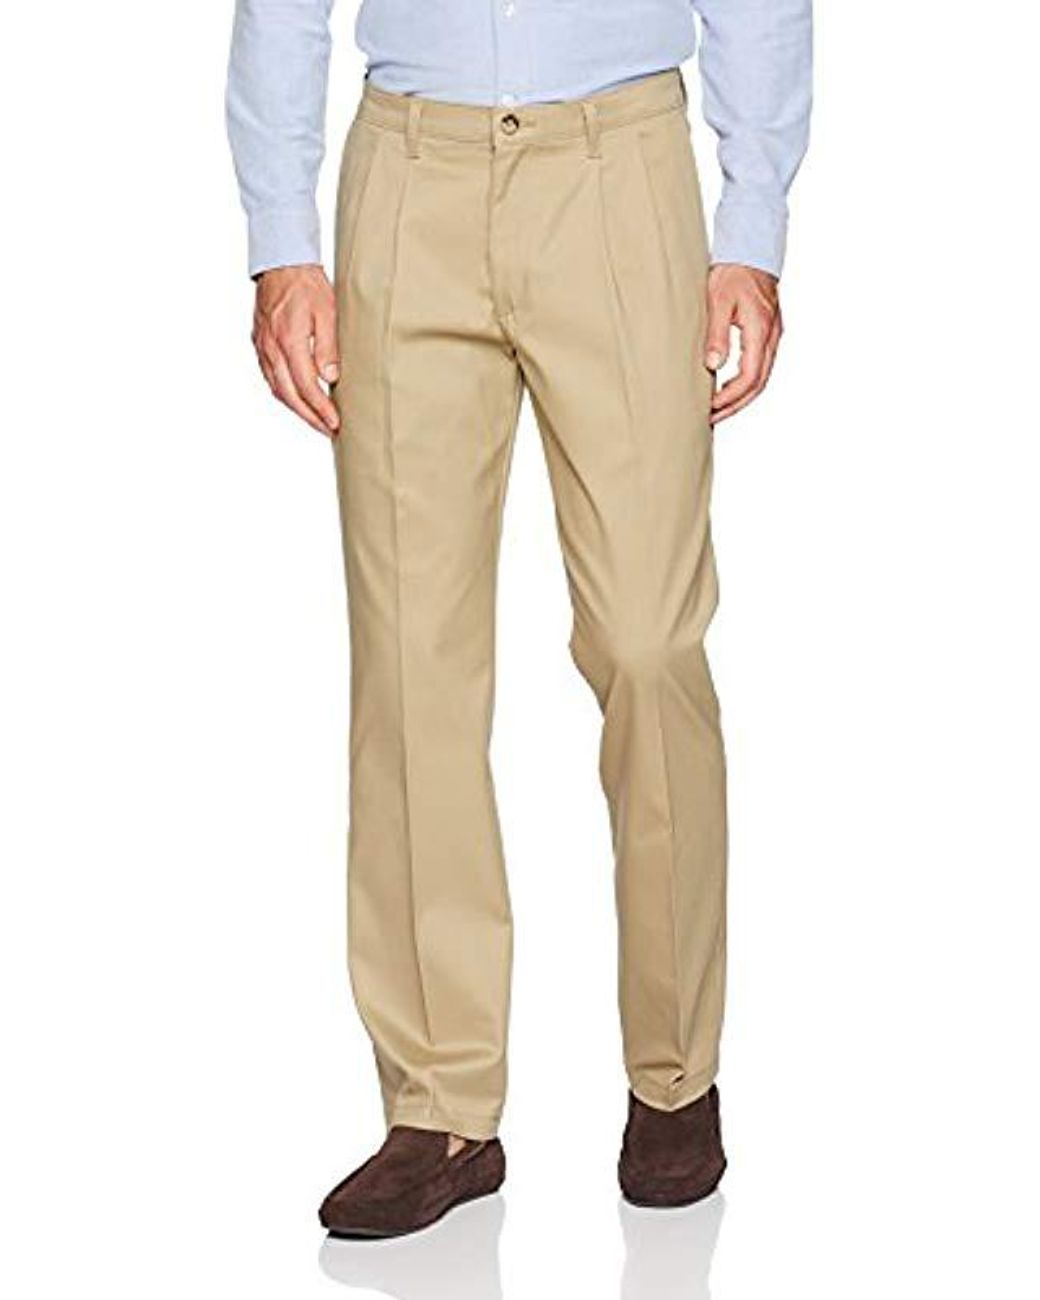 Lee Jeans Total Freedom Stretch Relaxed Fit Pleated Front Pant in Khaki ...